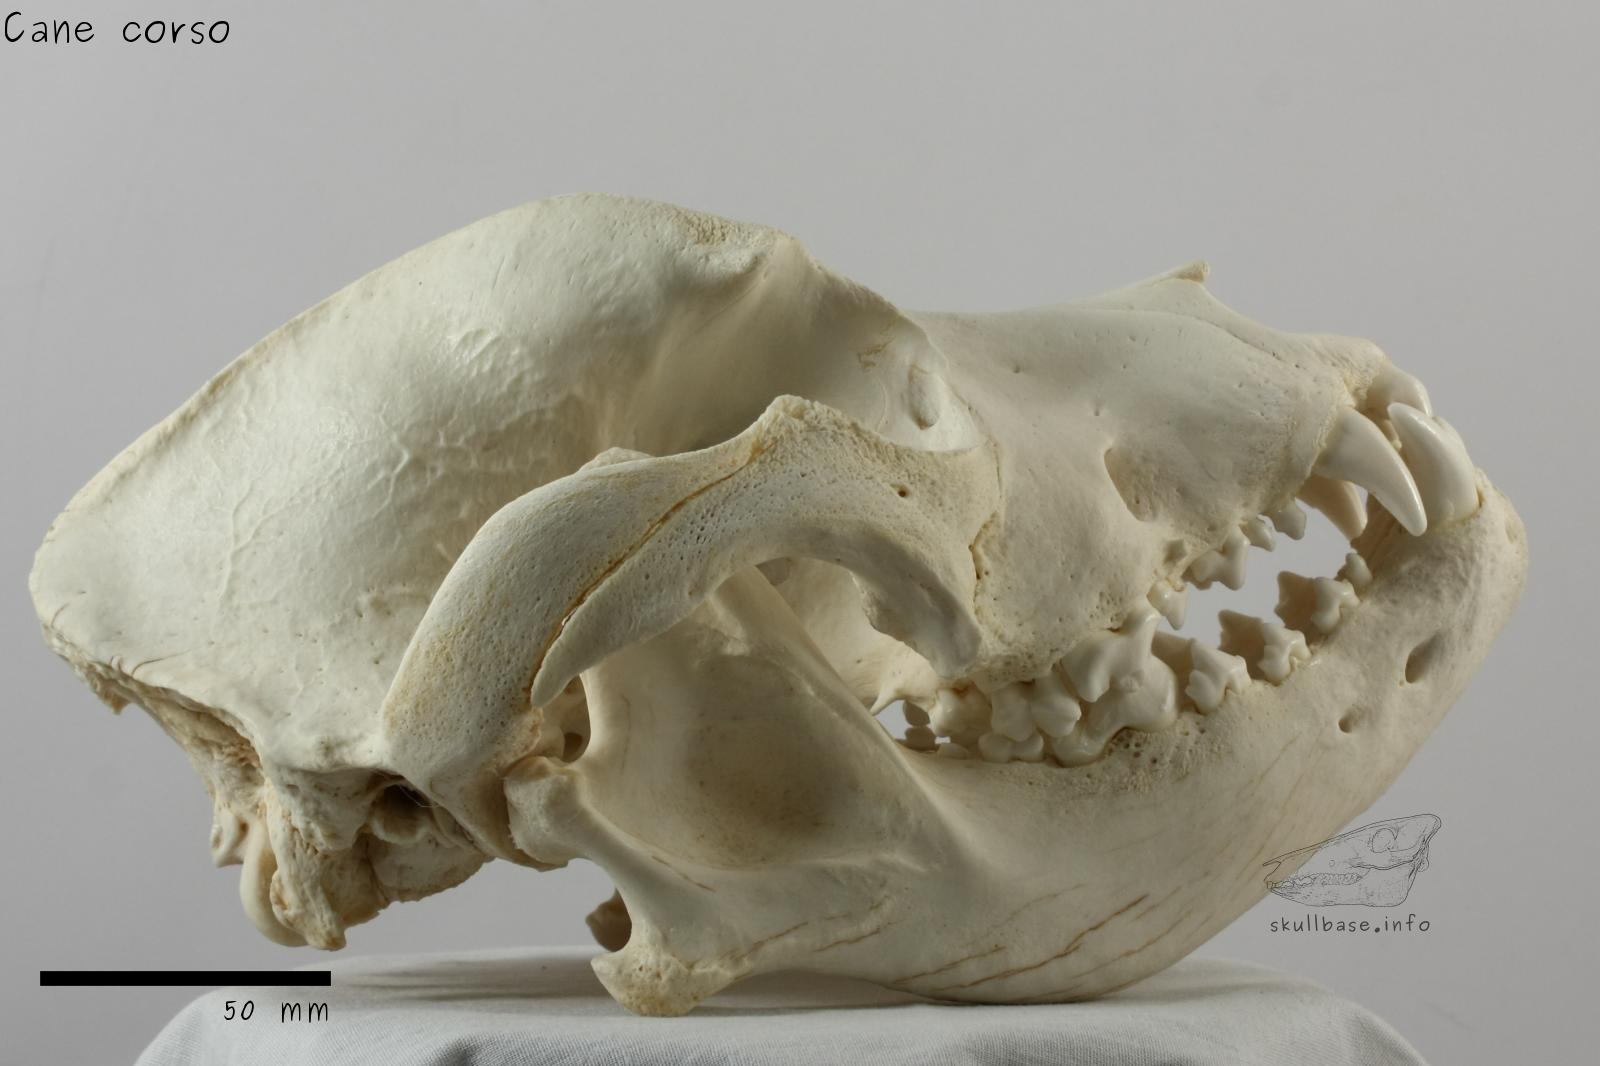 Cane corso (Canis lupus familiaris) skull lateral view